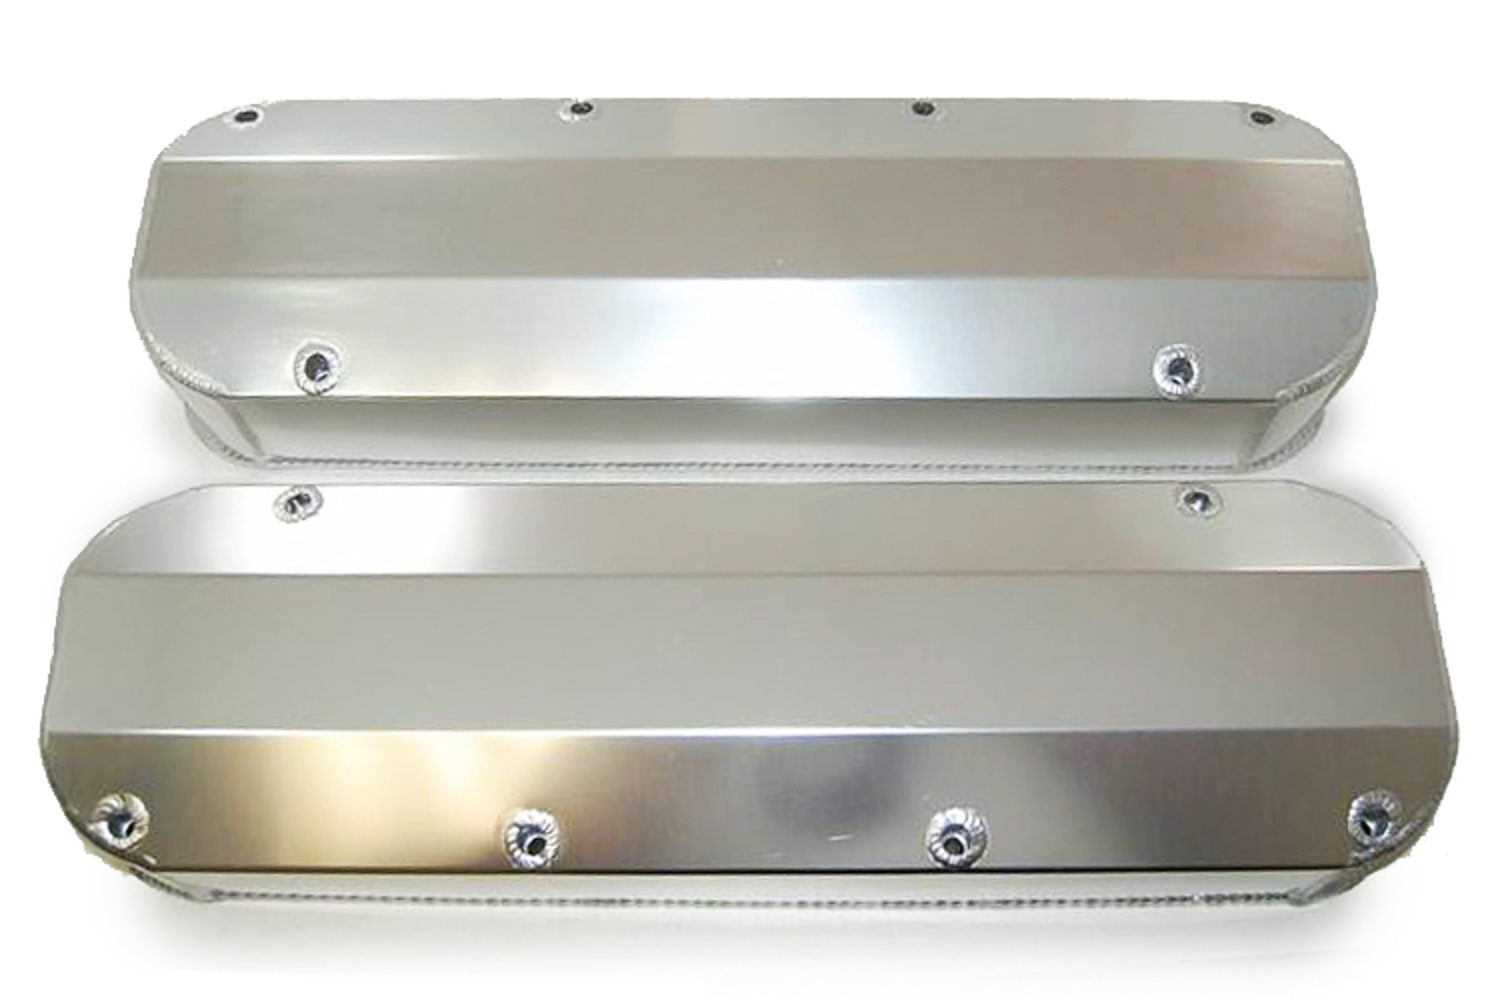 Racing Power Company R6355 Valve Cover, Tall, 4 in Height, Hardware Included, Fabricated Aluminum, Satin, Big Block Ford, Pair